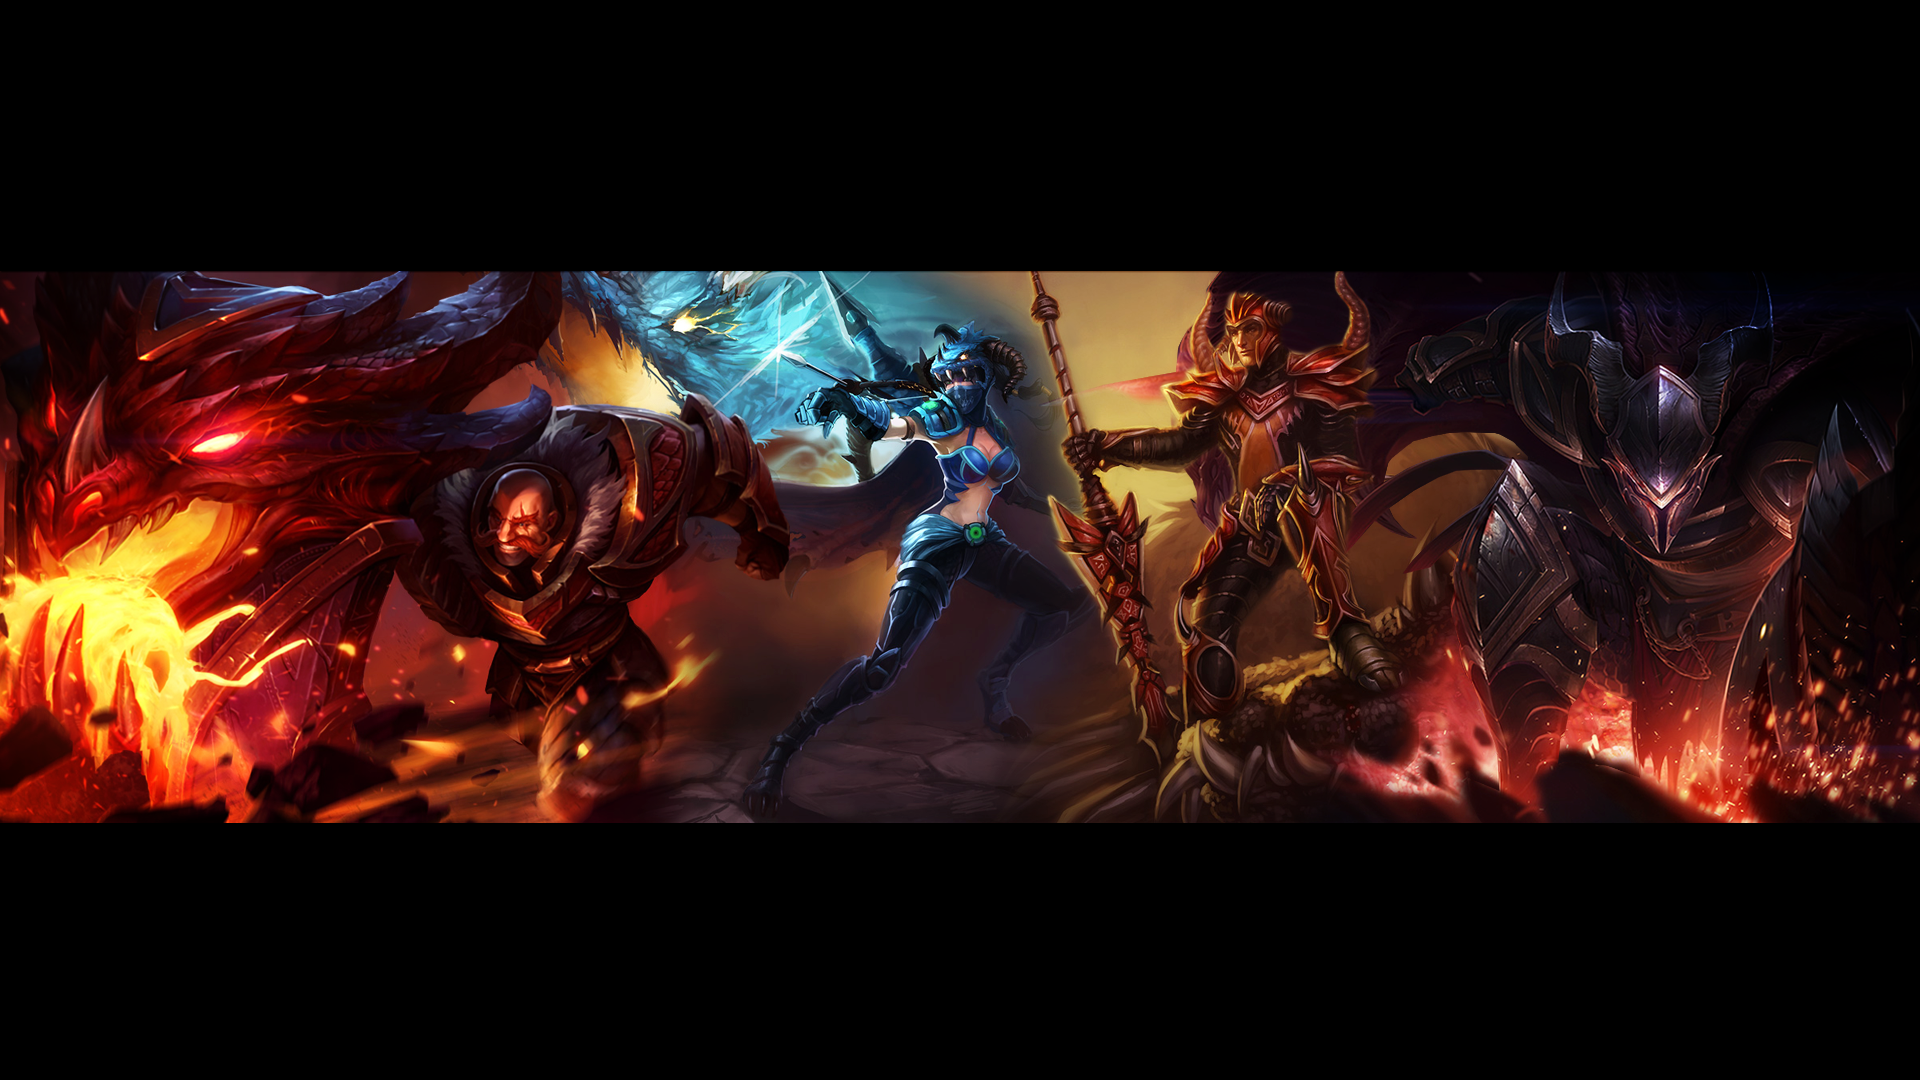 League of Legends   Dragon slayers wallpaper by Asheralia on